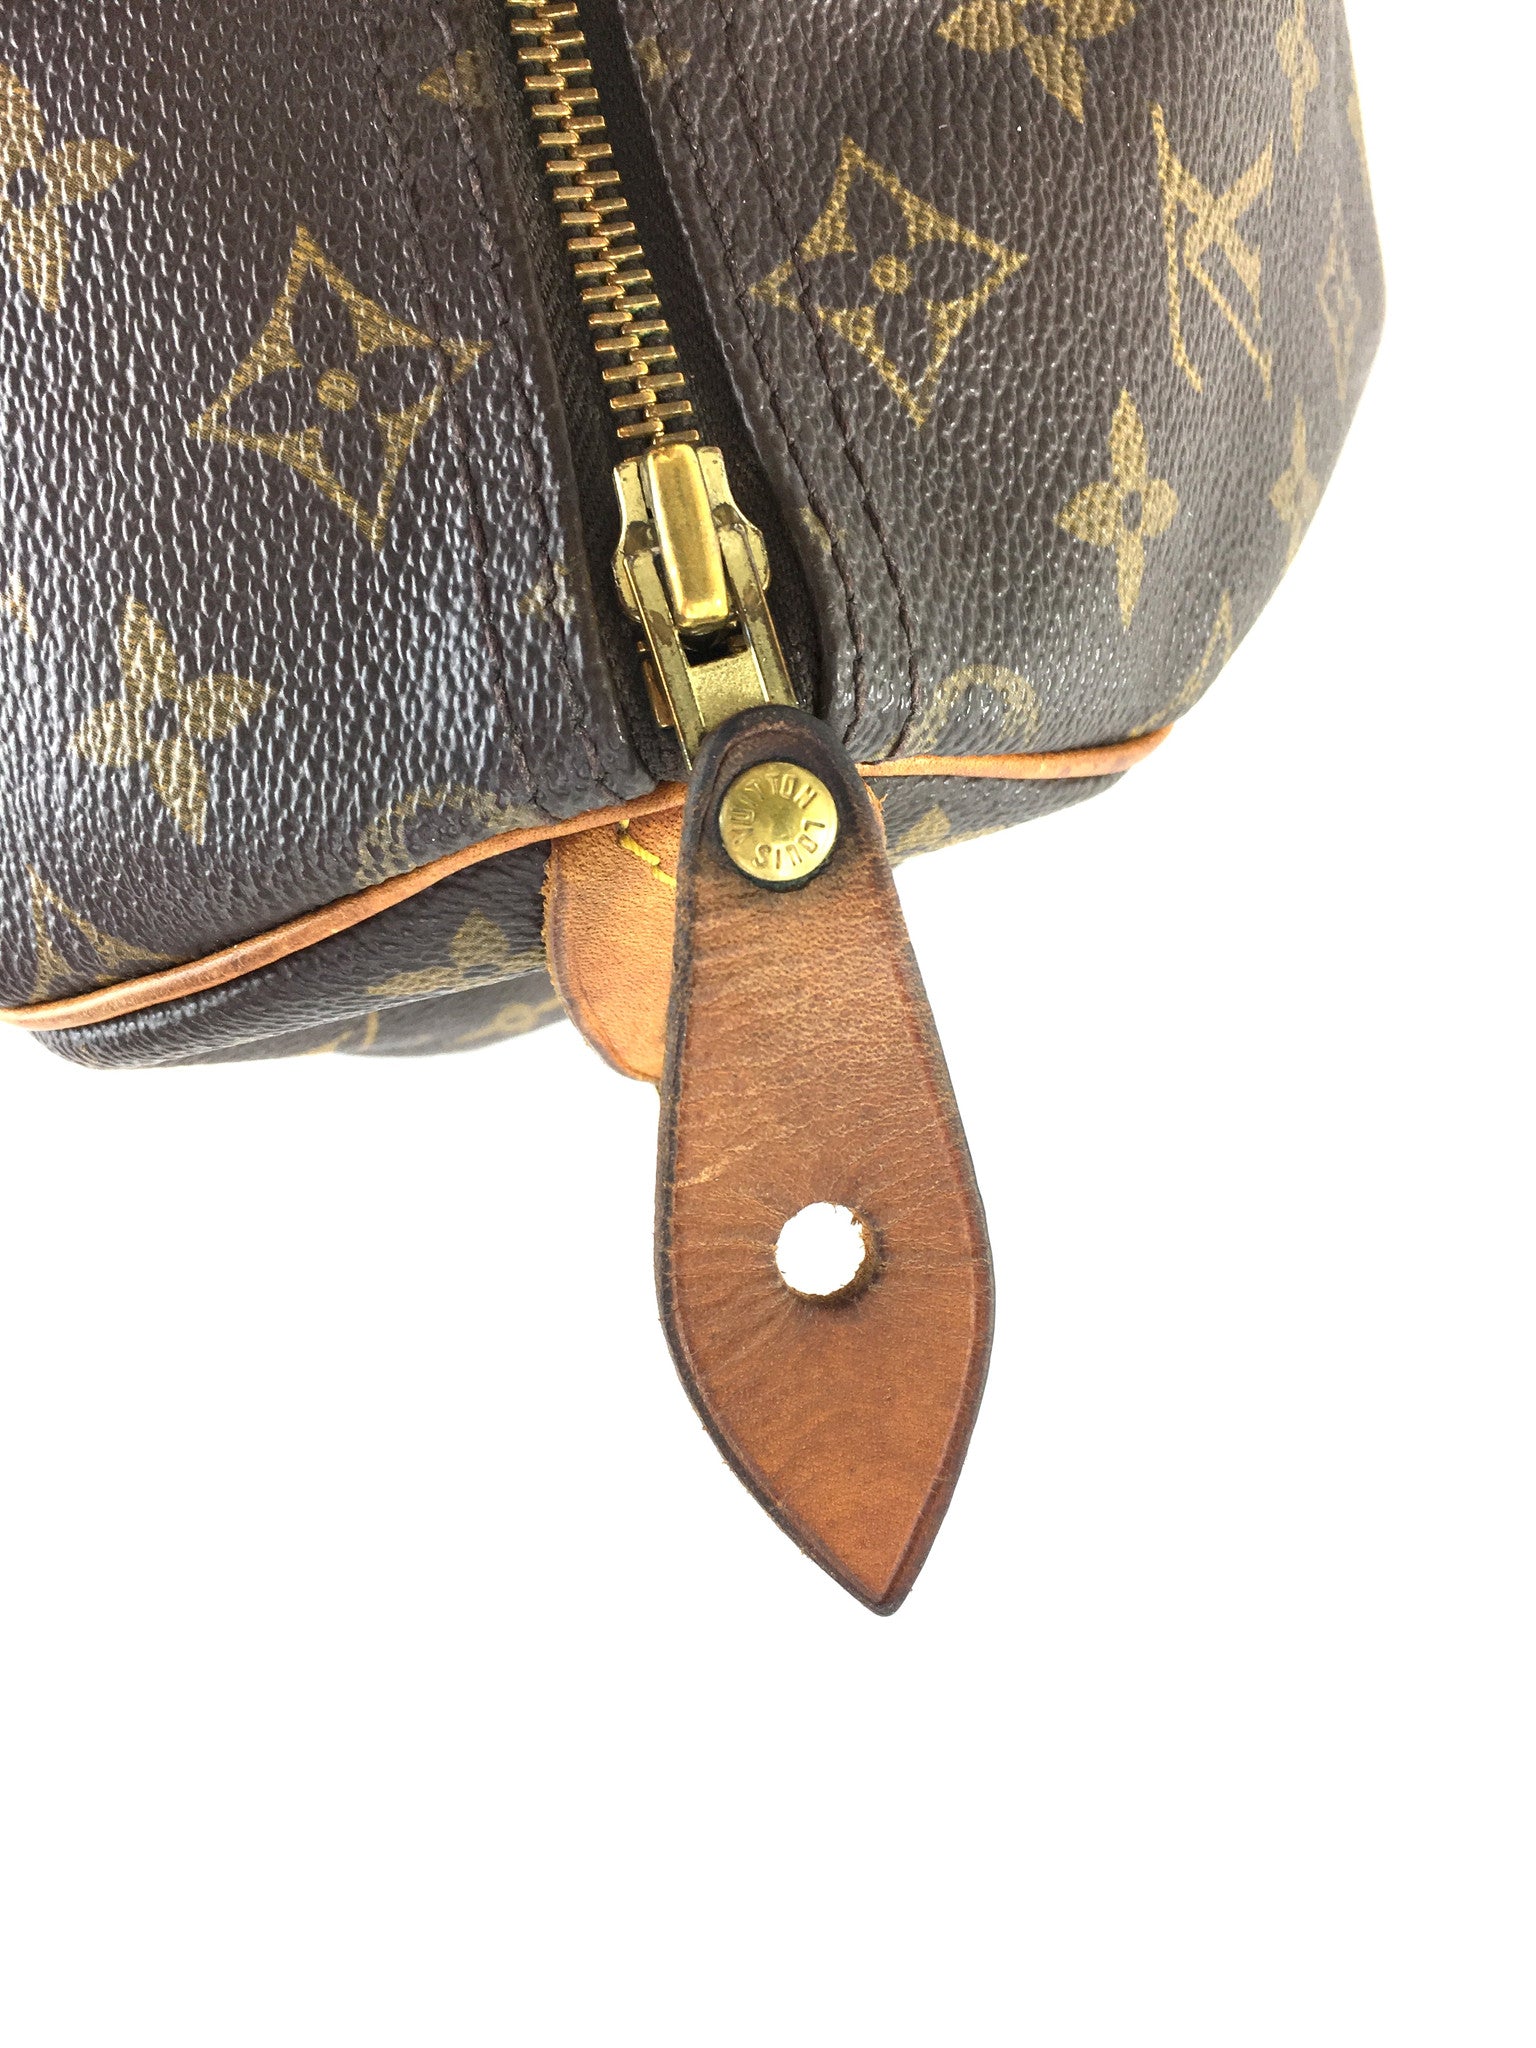 Louis Vuitton Bag With Scarf Handle - 2 For Sale on 1stDibs